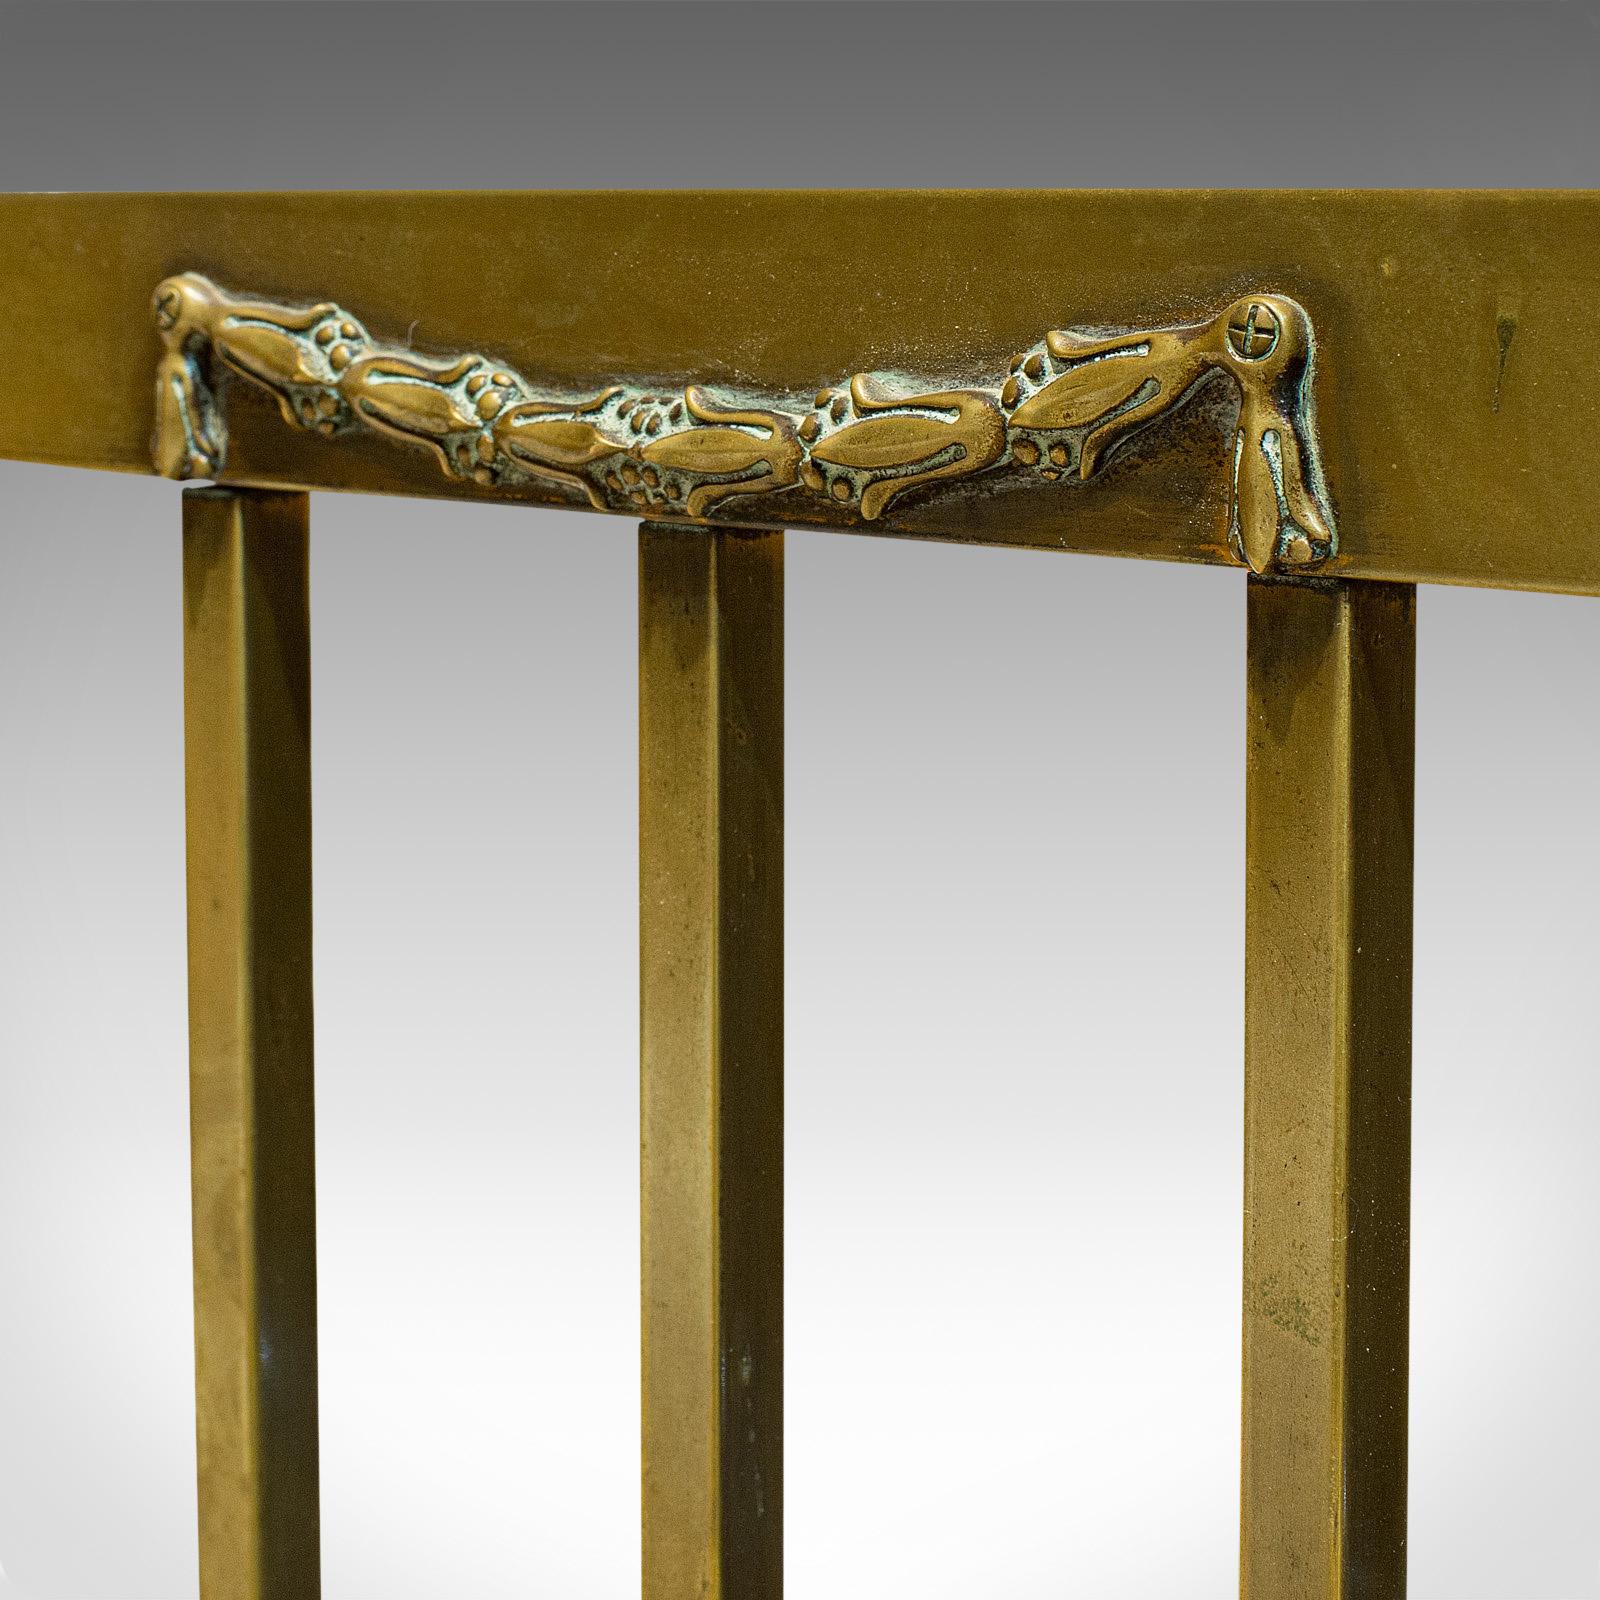 Antique Bed Frame, English, Brass, Iron, Double Bedstead, Victorian, circa 1880 5